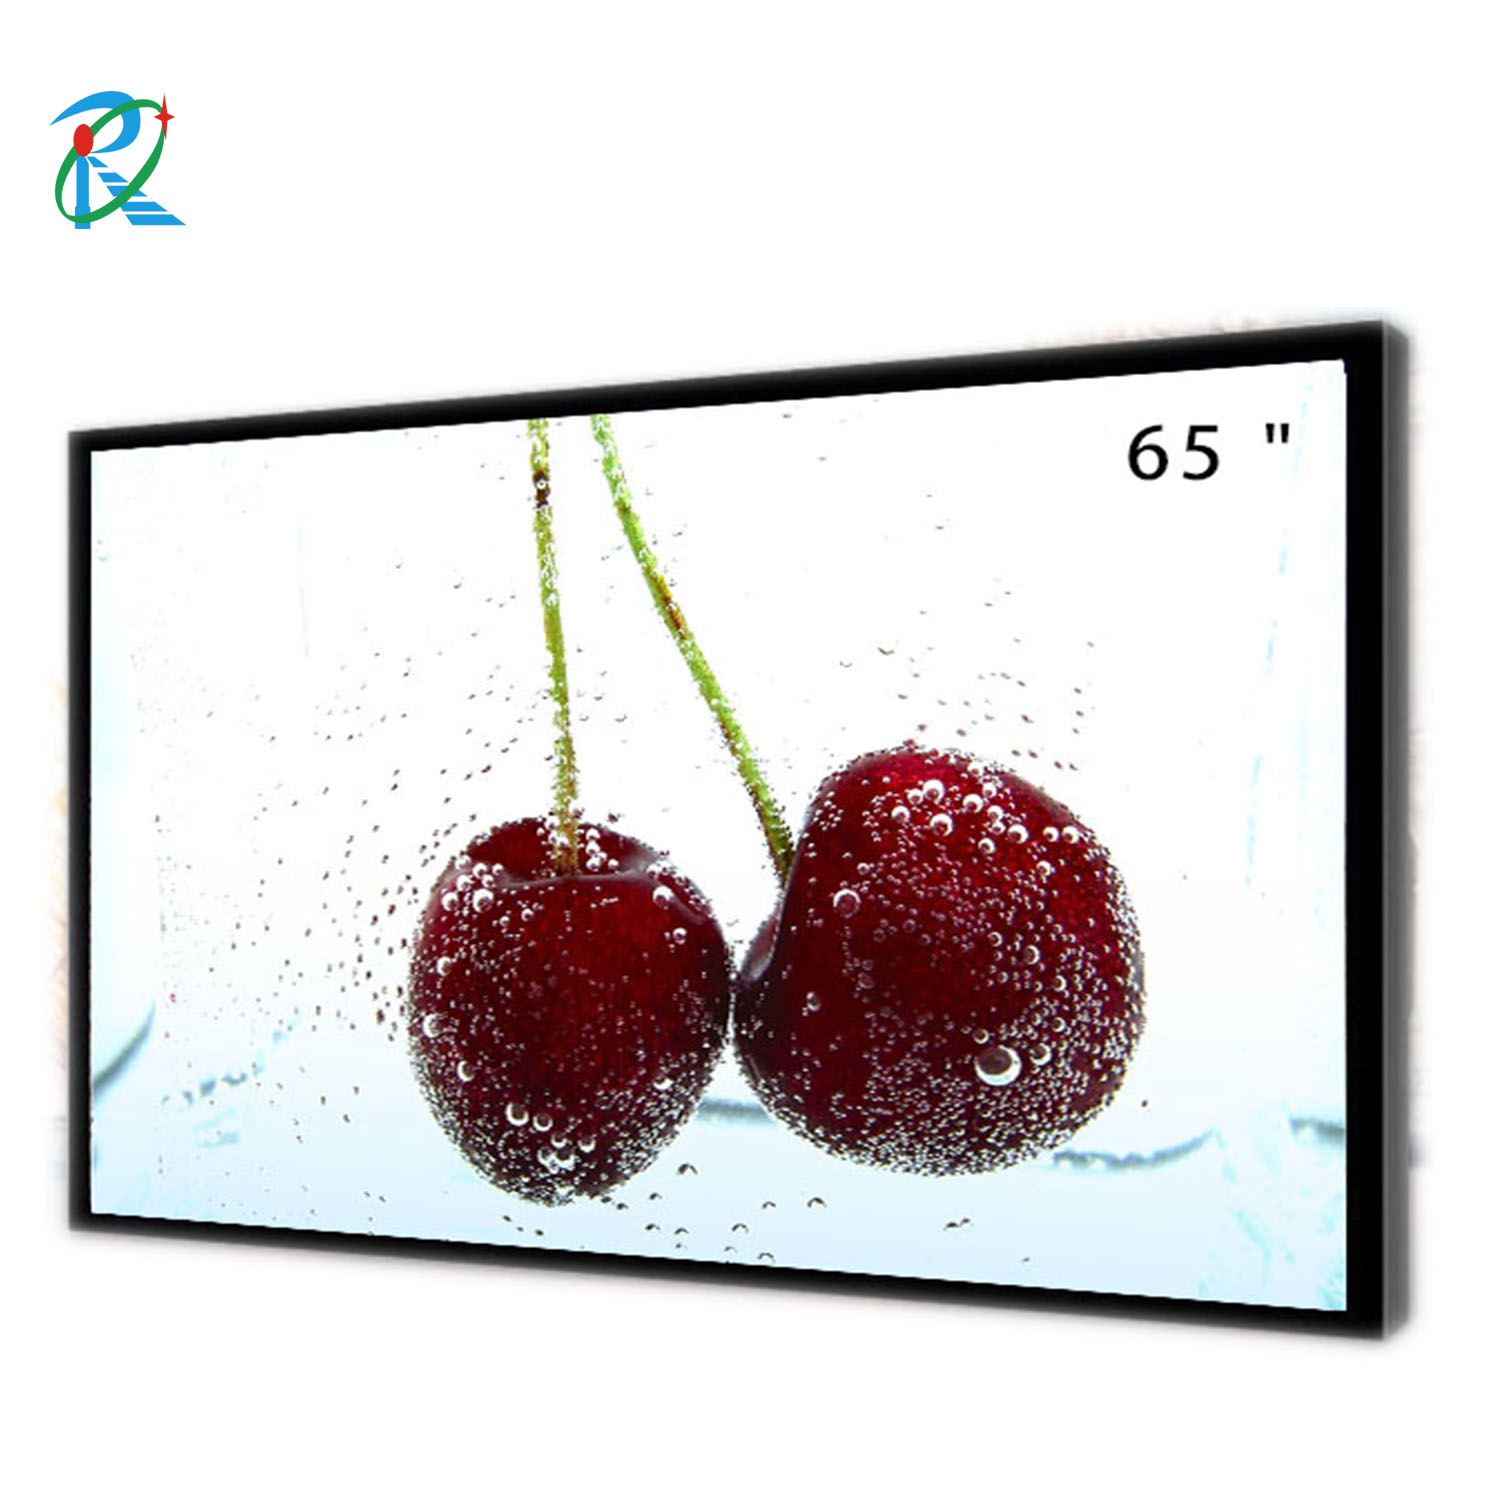 65 inch outdoor high brightness sunlight readable LCD display